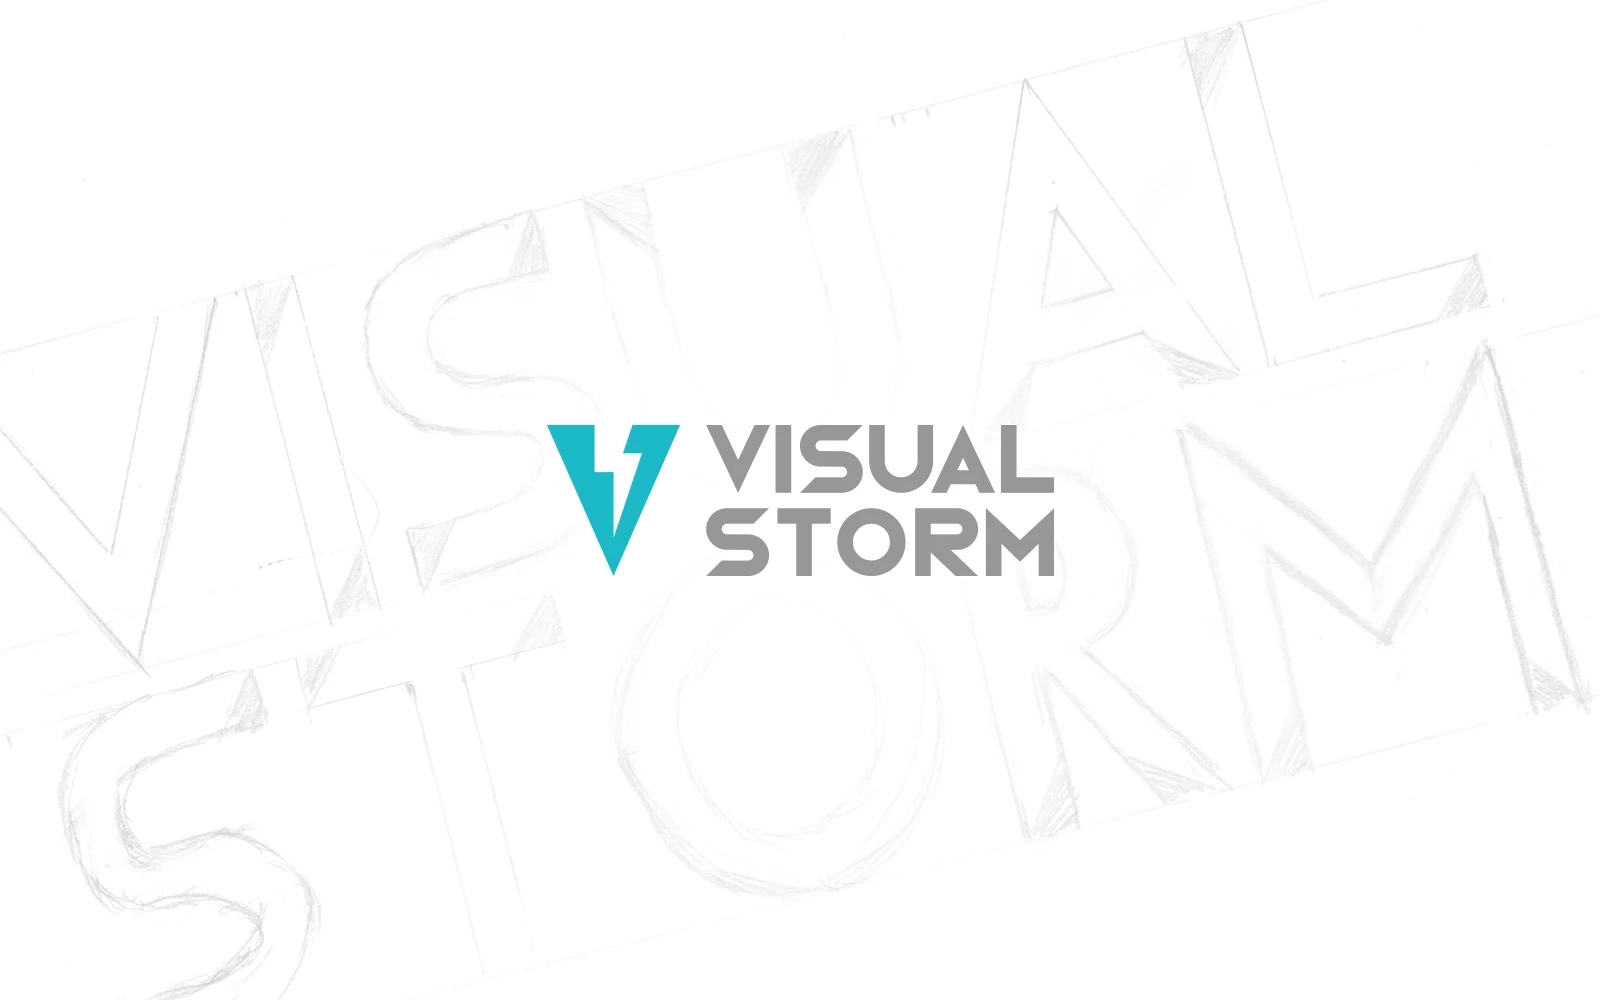 A blue ‘v’ with a lightning bolt in the middle with angular text saying ‘Visual Storm’ next to it. This modern and professional logo is displayed on a white background showing initial sketches of the logo